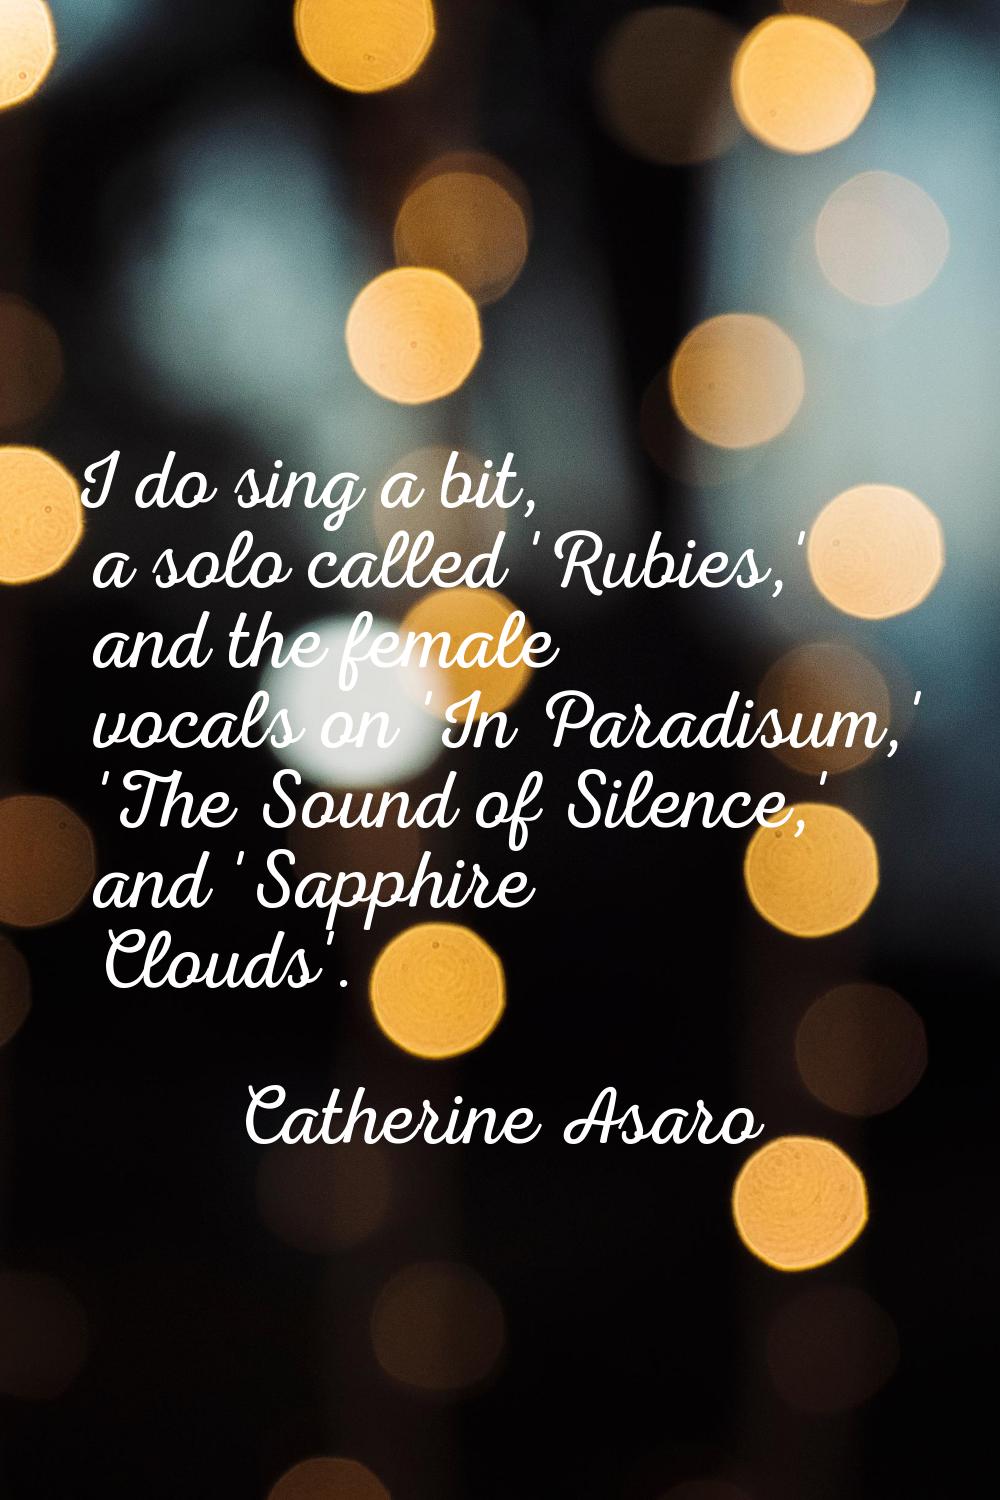 I do sing a bit, a solo called 'Rubies,' and the female vocals on 'In Paradisum,' 'The Sound of Sil